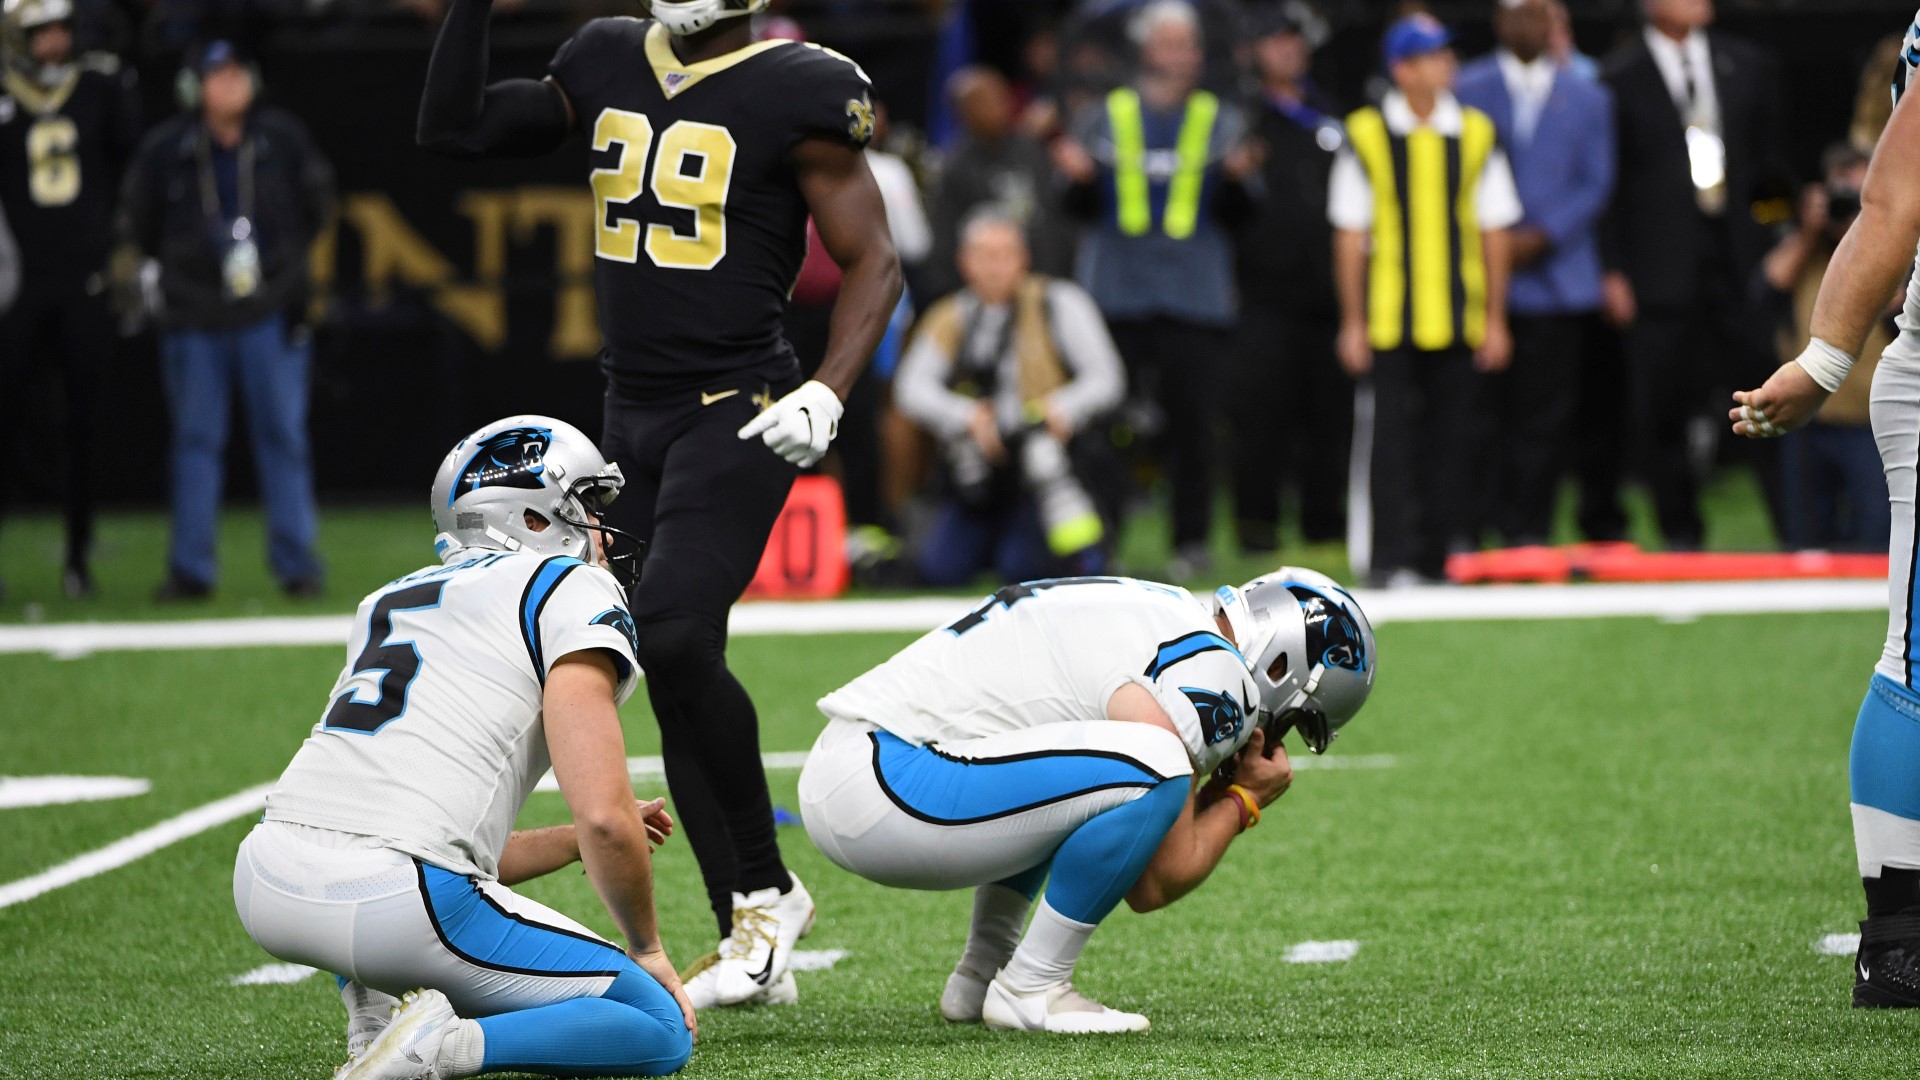 After missing a 28-yard field goal with two minutes to play vs the Saints, rookie kicker Joey Slye shouldered blame for a 34-31 Panthers loss.